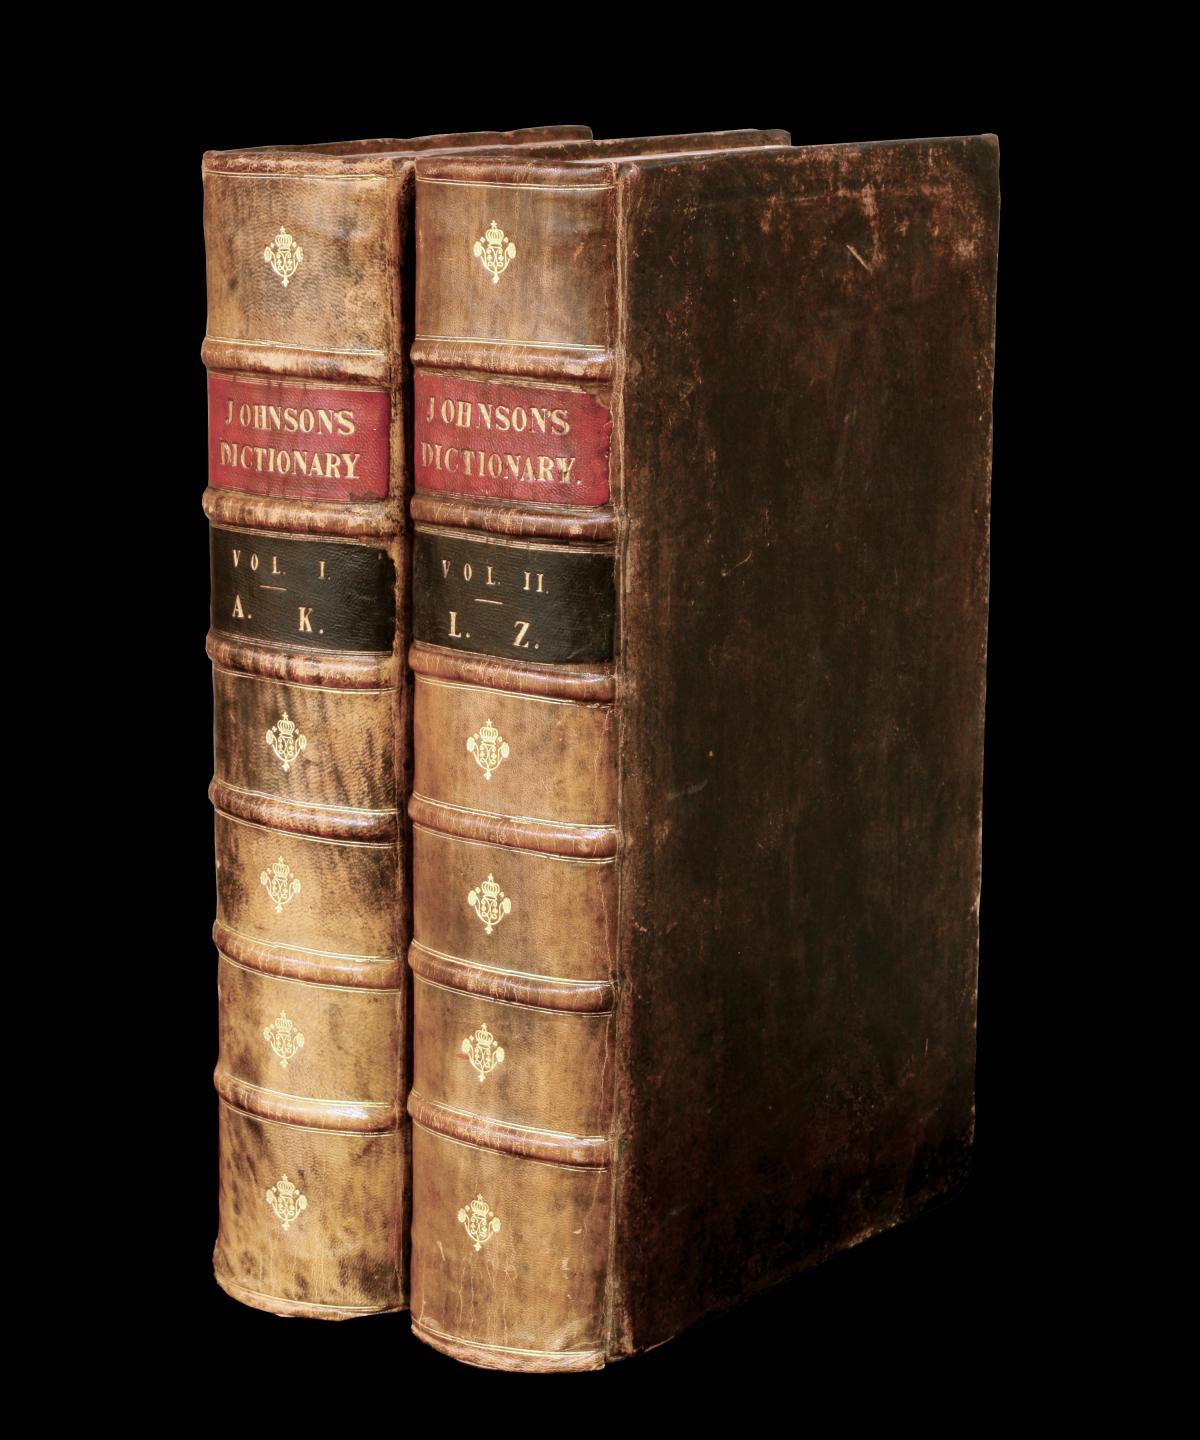 two volumes of the 1755 dictionary, bound in brown leather with red, black and gold bands on the spines